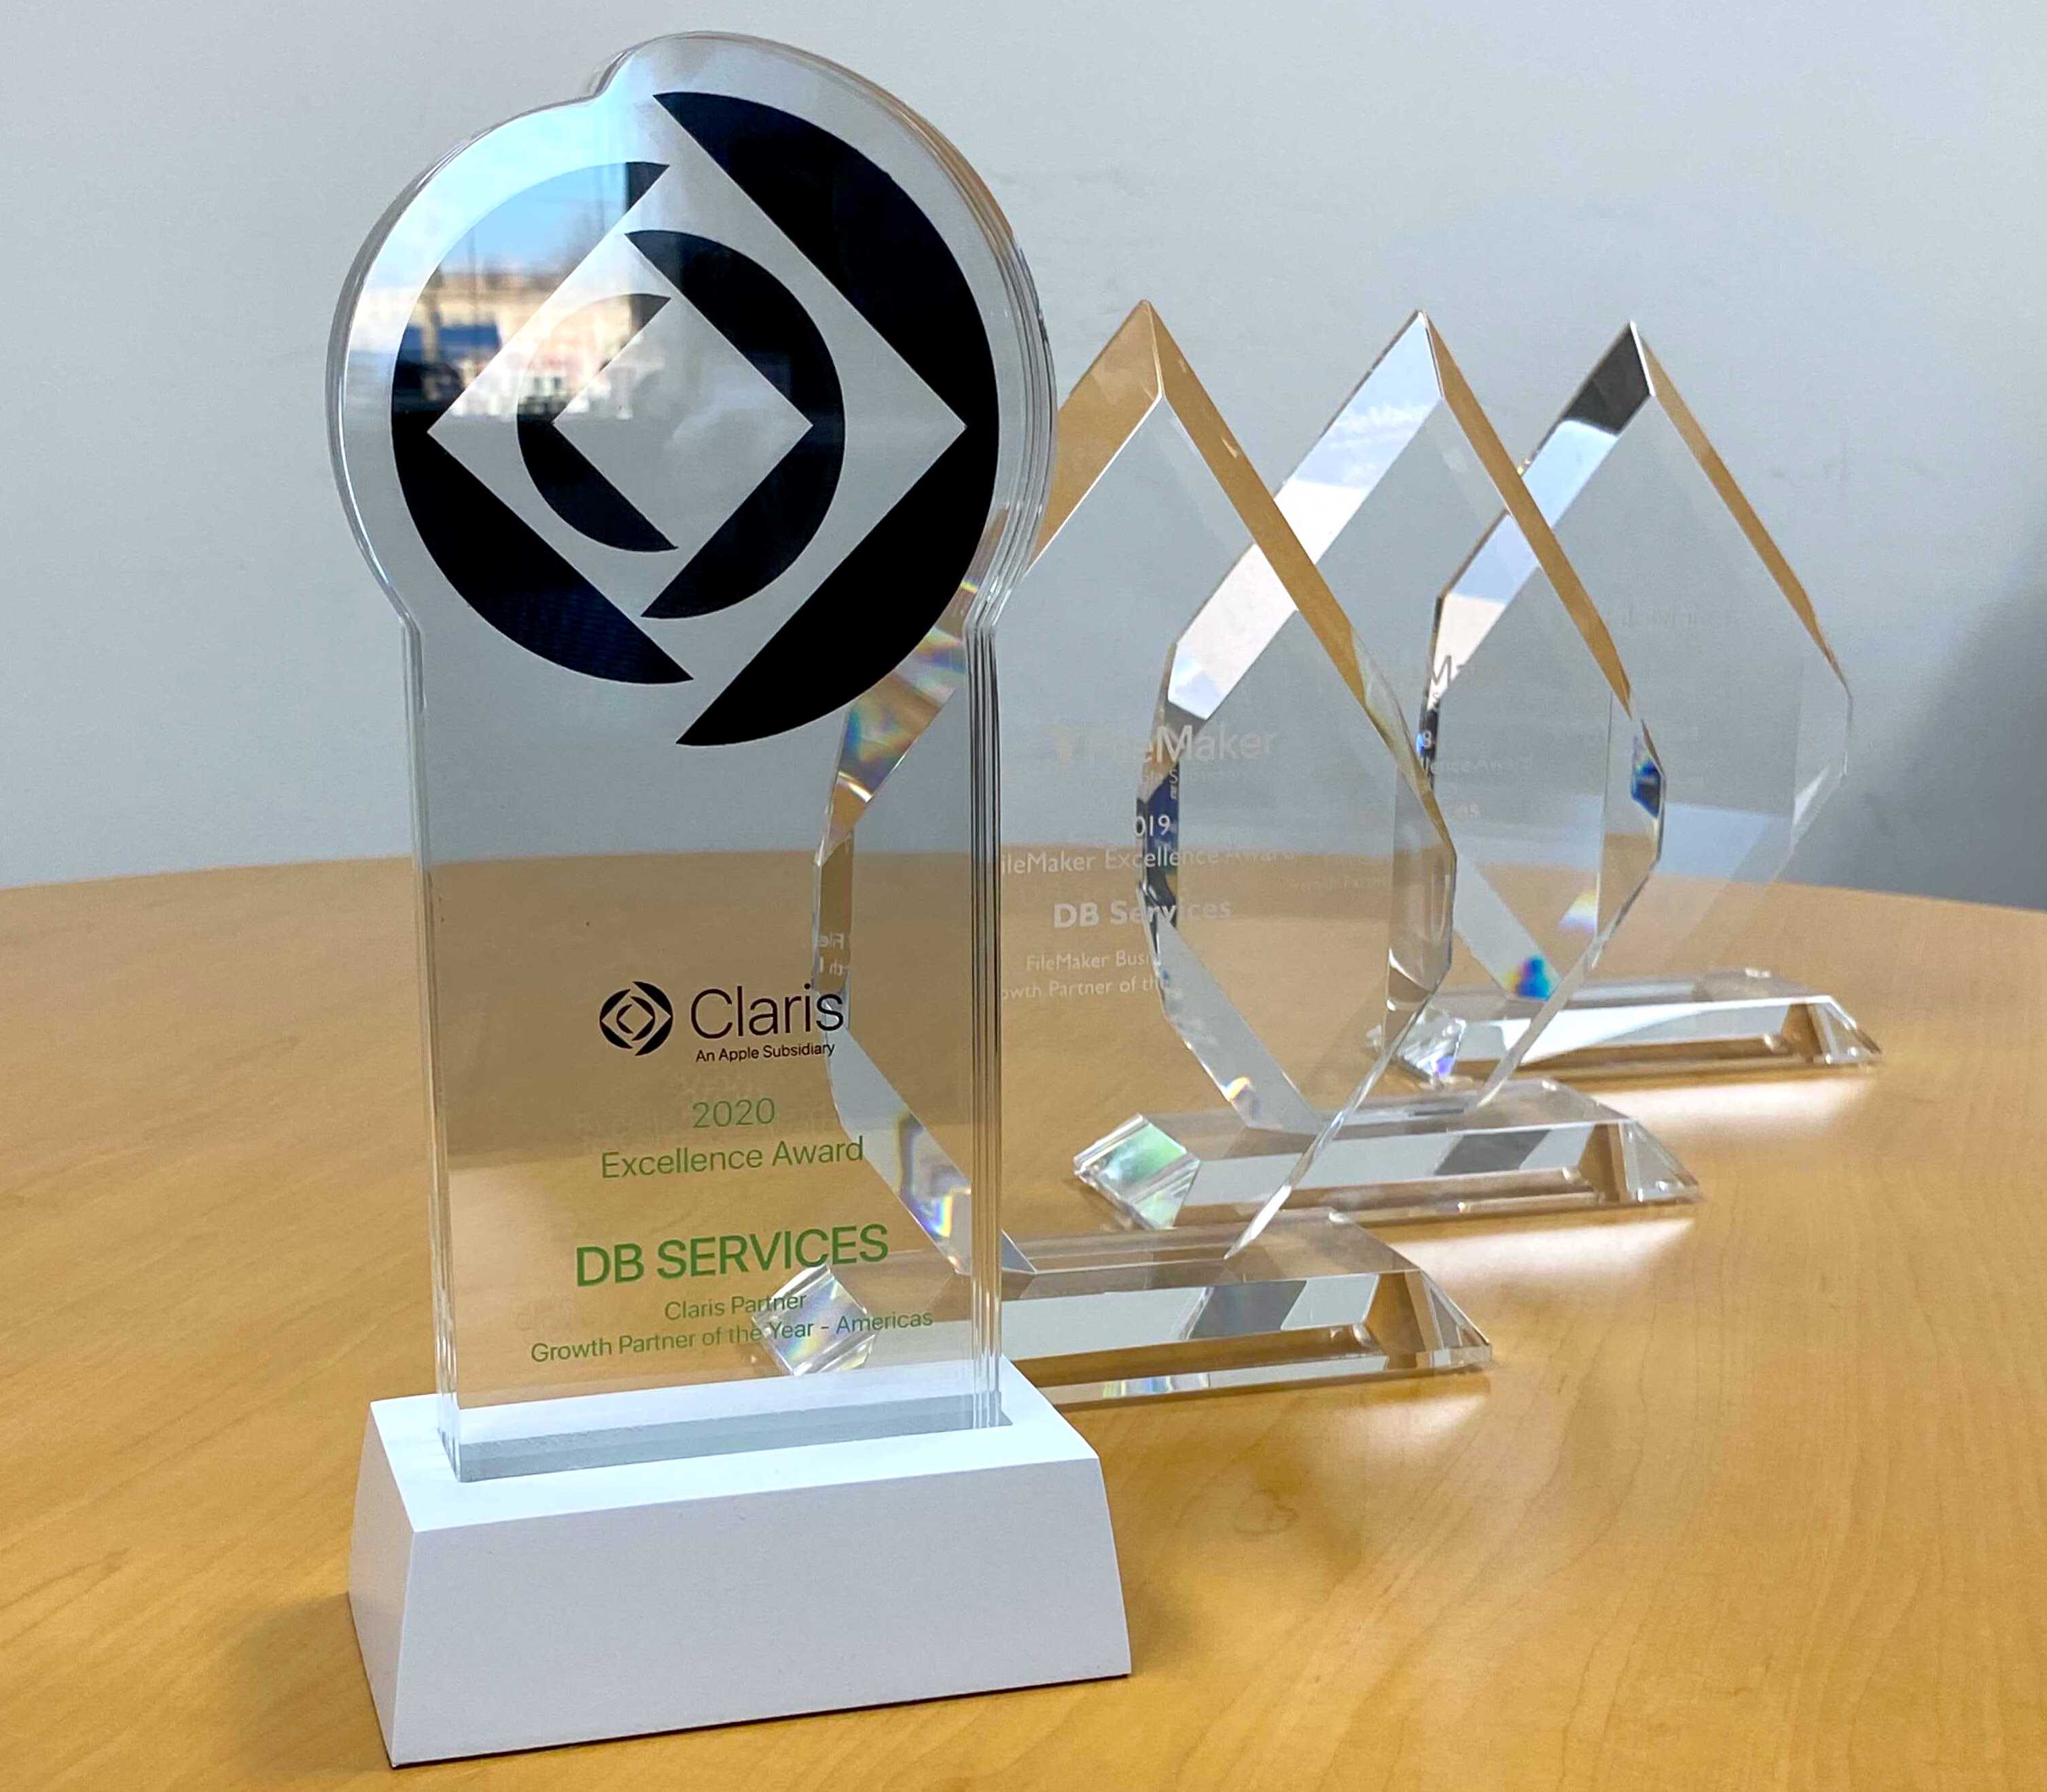 DB Services Named FileMaker Partner of the Year 2020